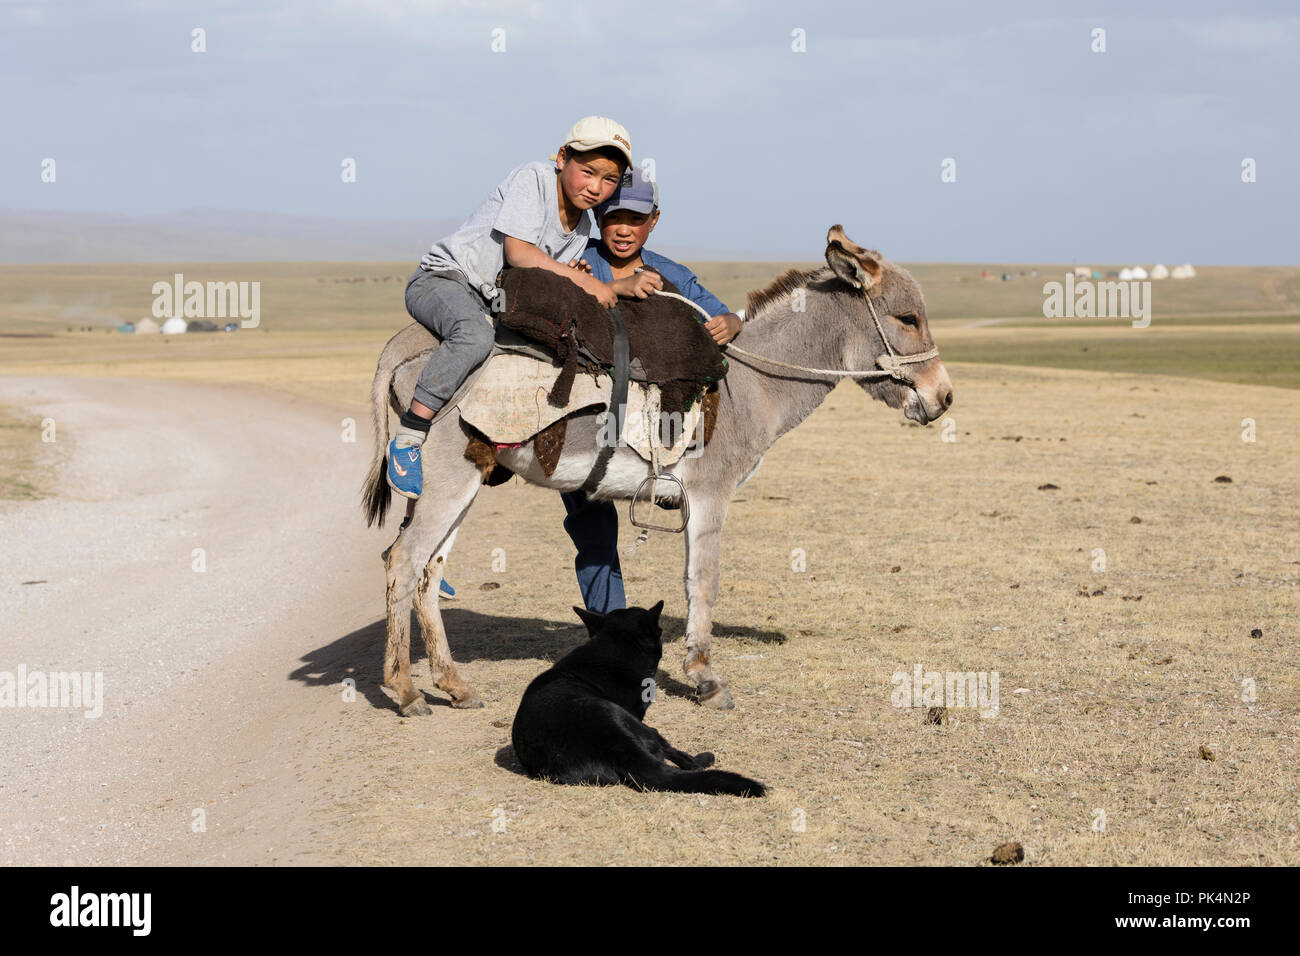 Song Kul, Kyrgyzstan, August 8 2018: Two boys and a donkey at Song Kul lake in Kyrgyzstan Stock Photo